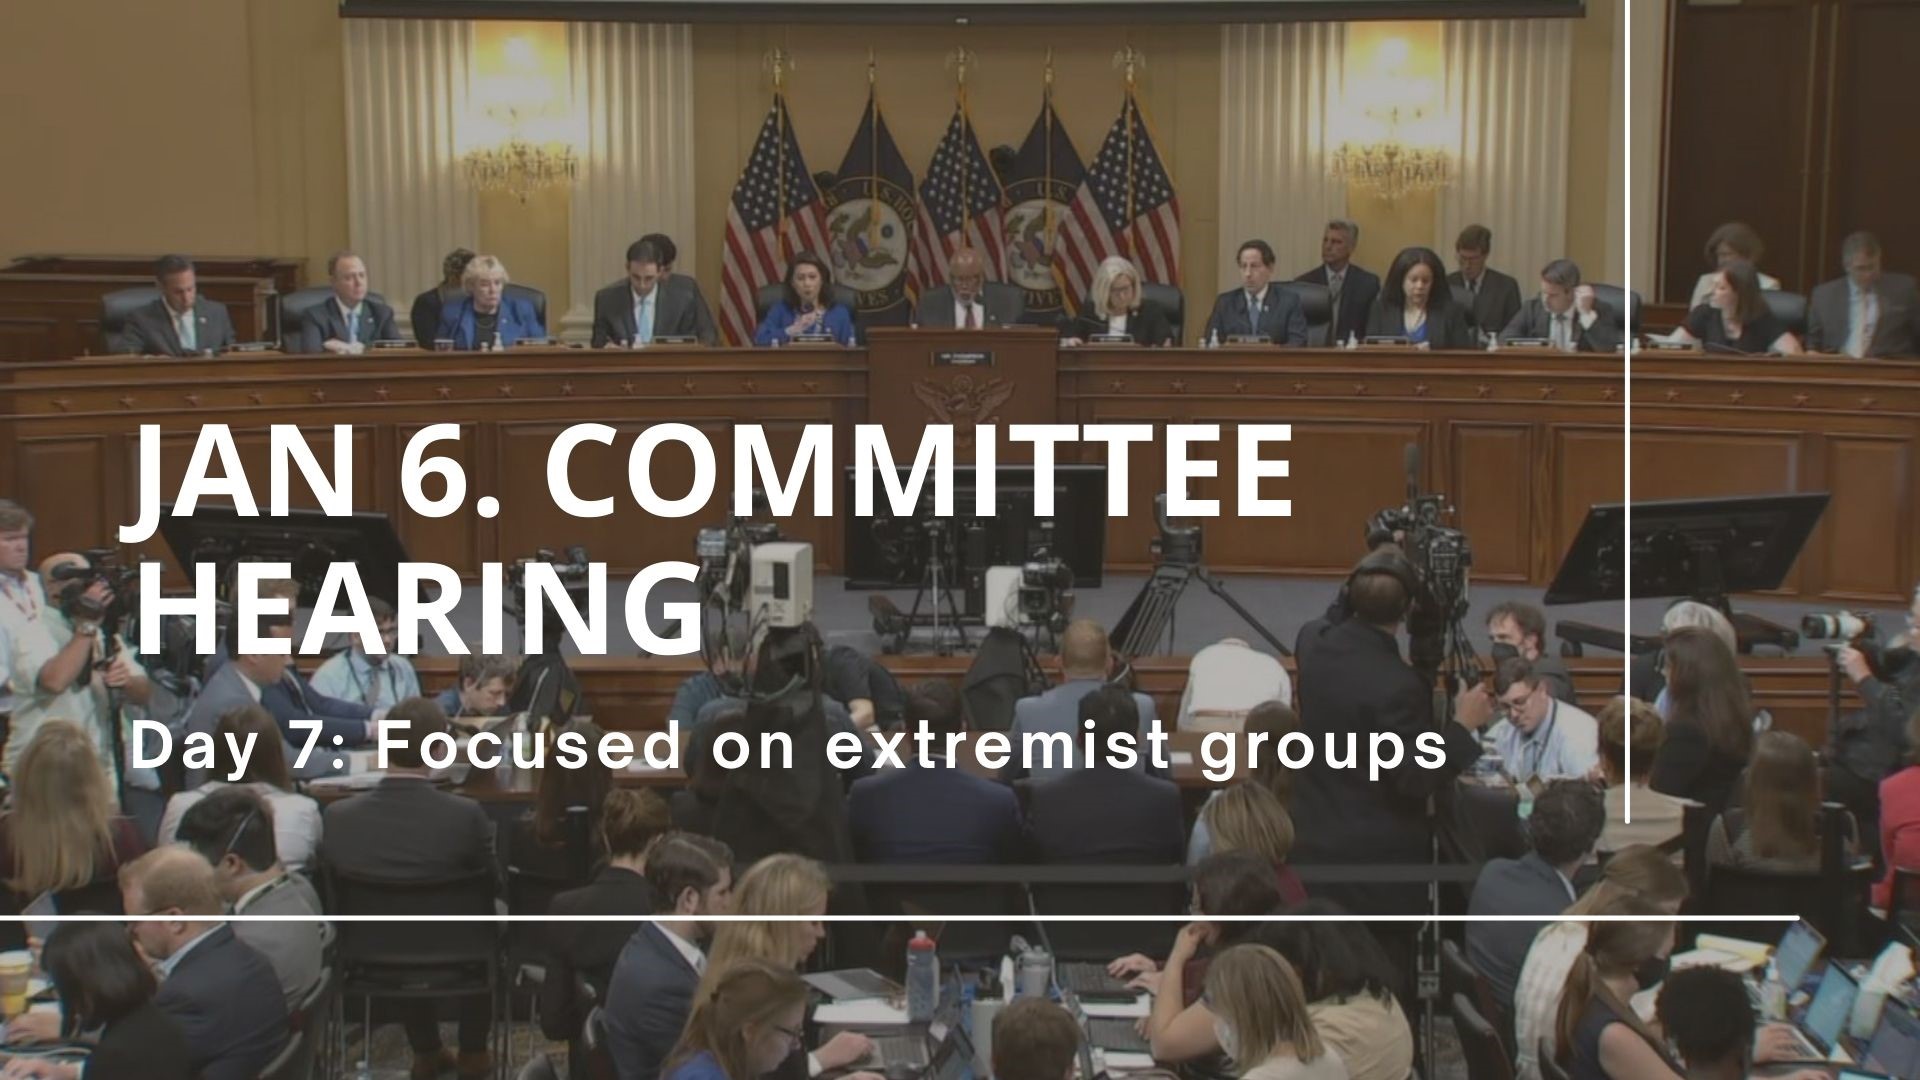 The first half the Jan. 6 committee hearing on July 12, 2022. Day 7 focused on the Proud Boys and Oathkeepers efforts.